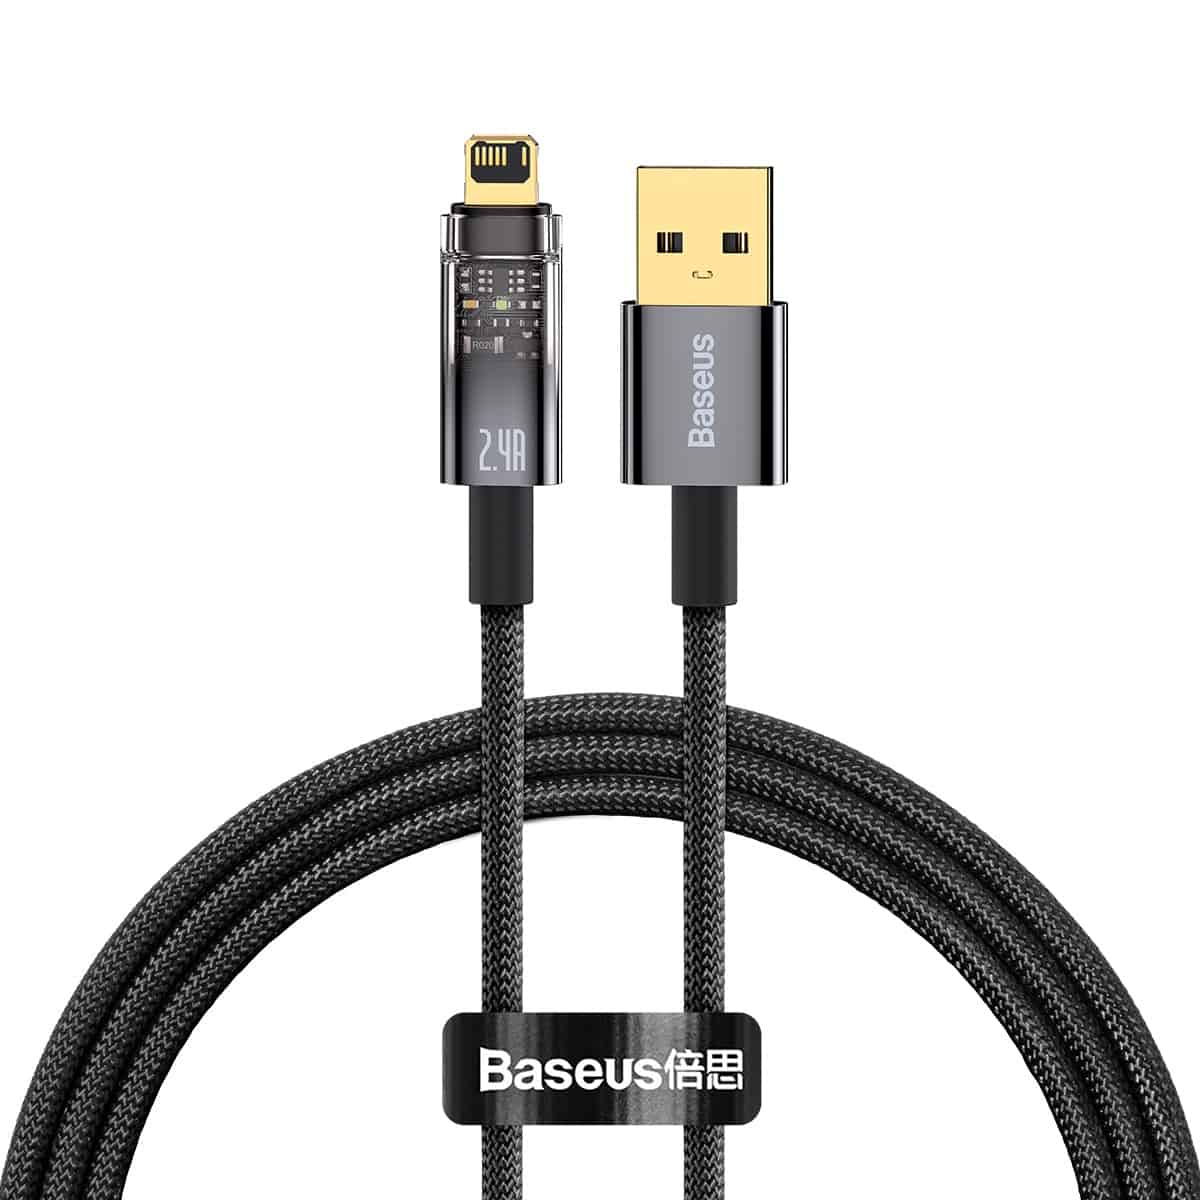 Baseus Explorer Series Auto Power-Off Fast Charging Data Cable USB to iPhone 2.4A